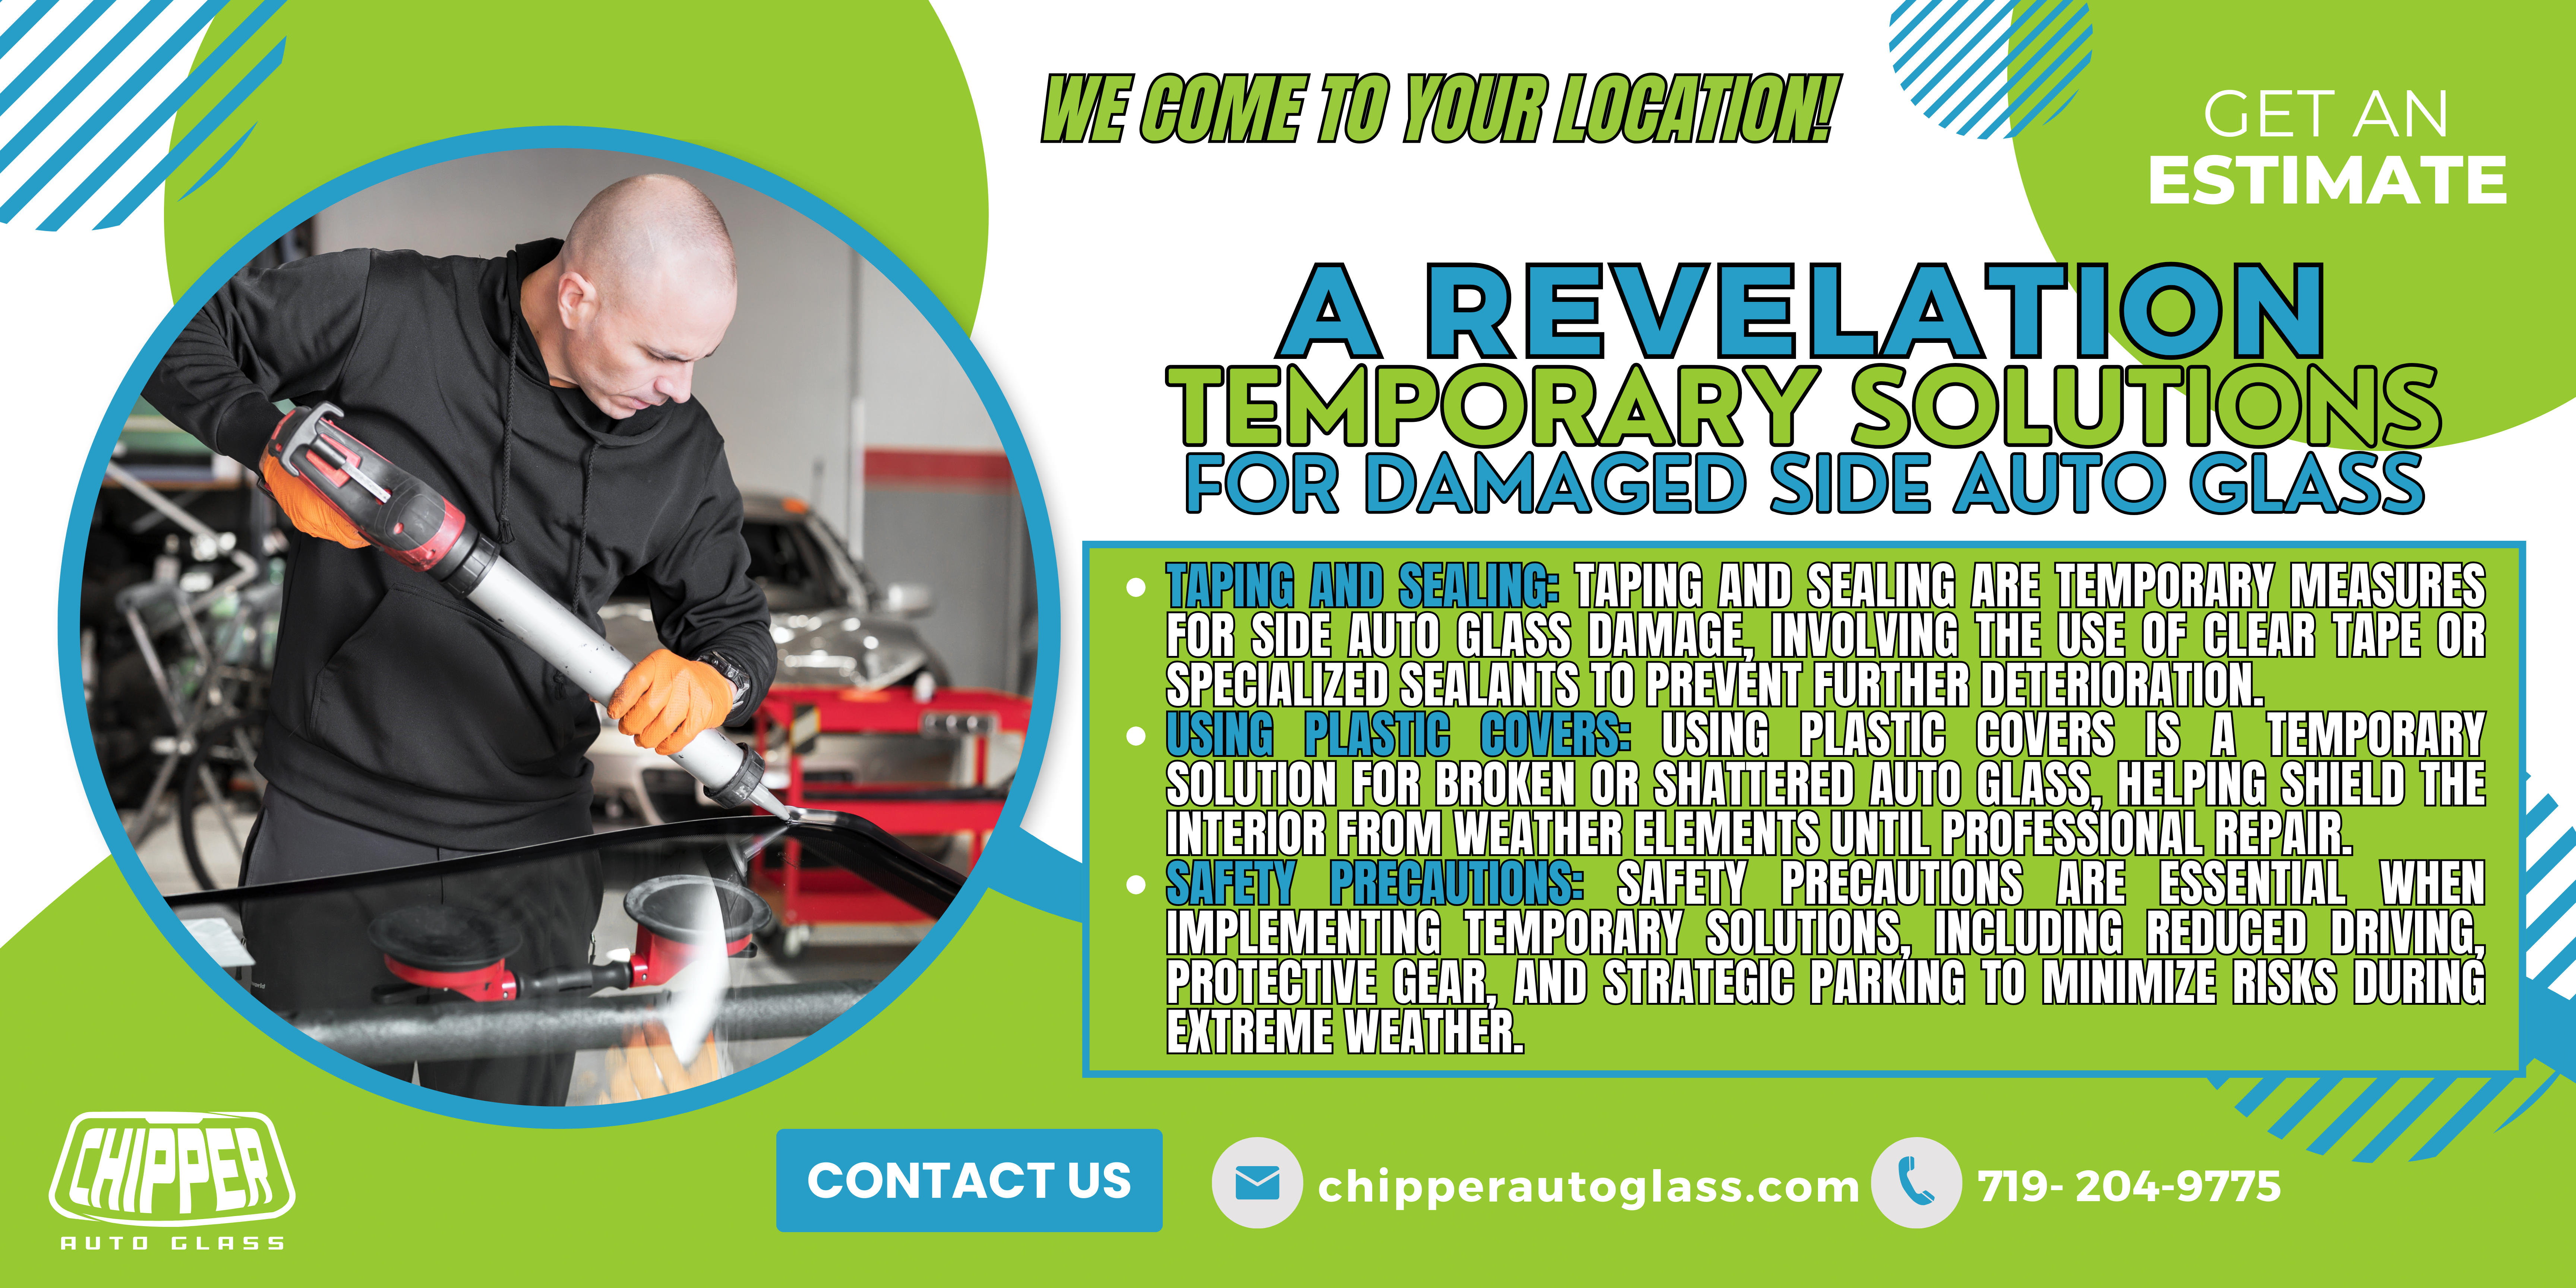 Side auto glass repair or replacement during extreme weather conditions